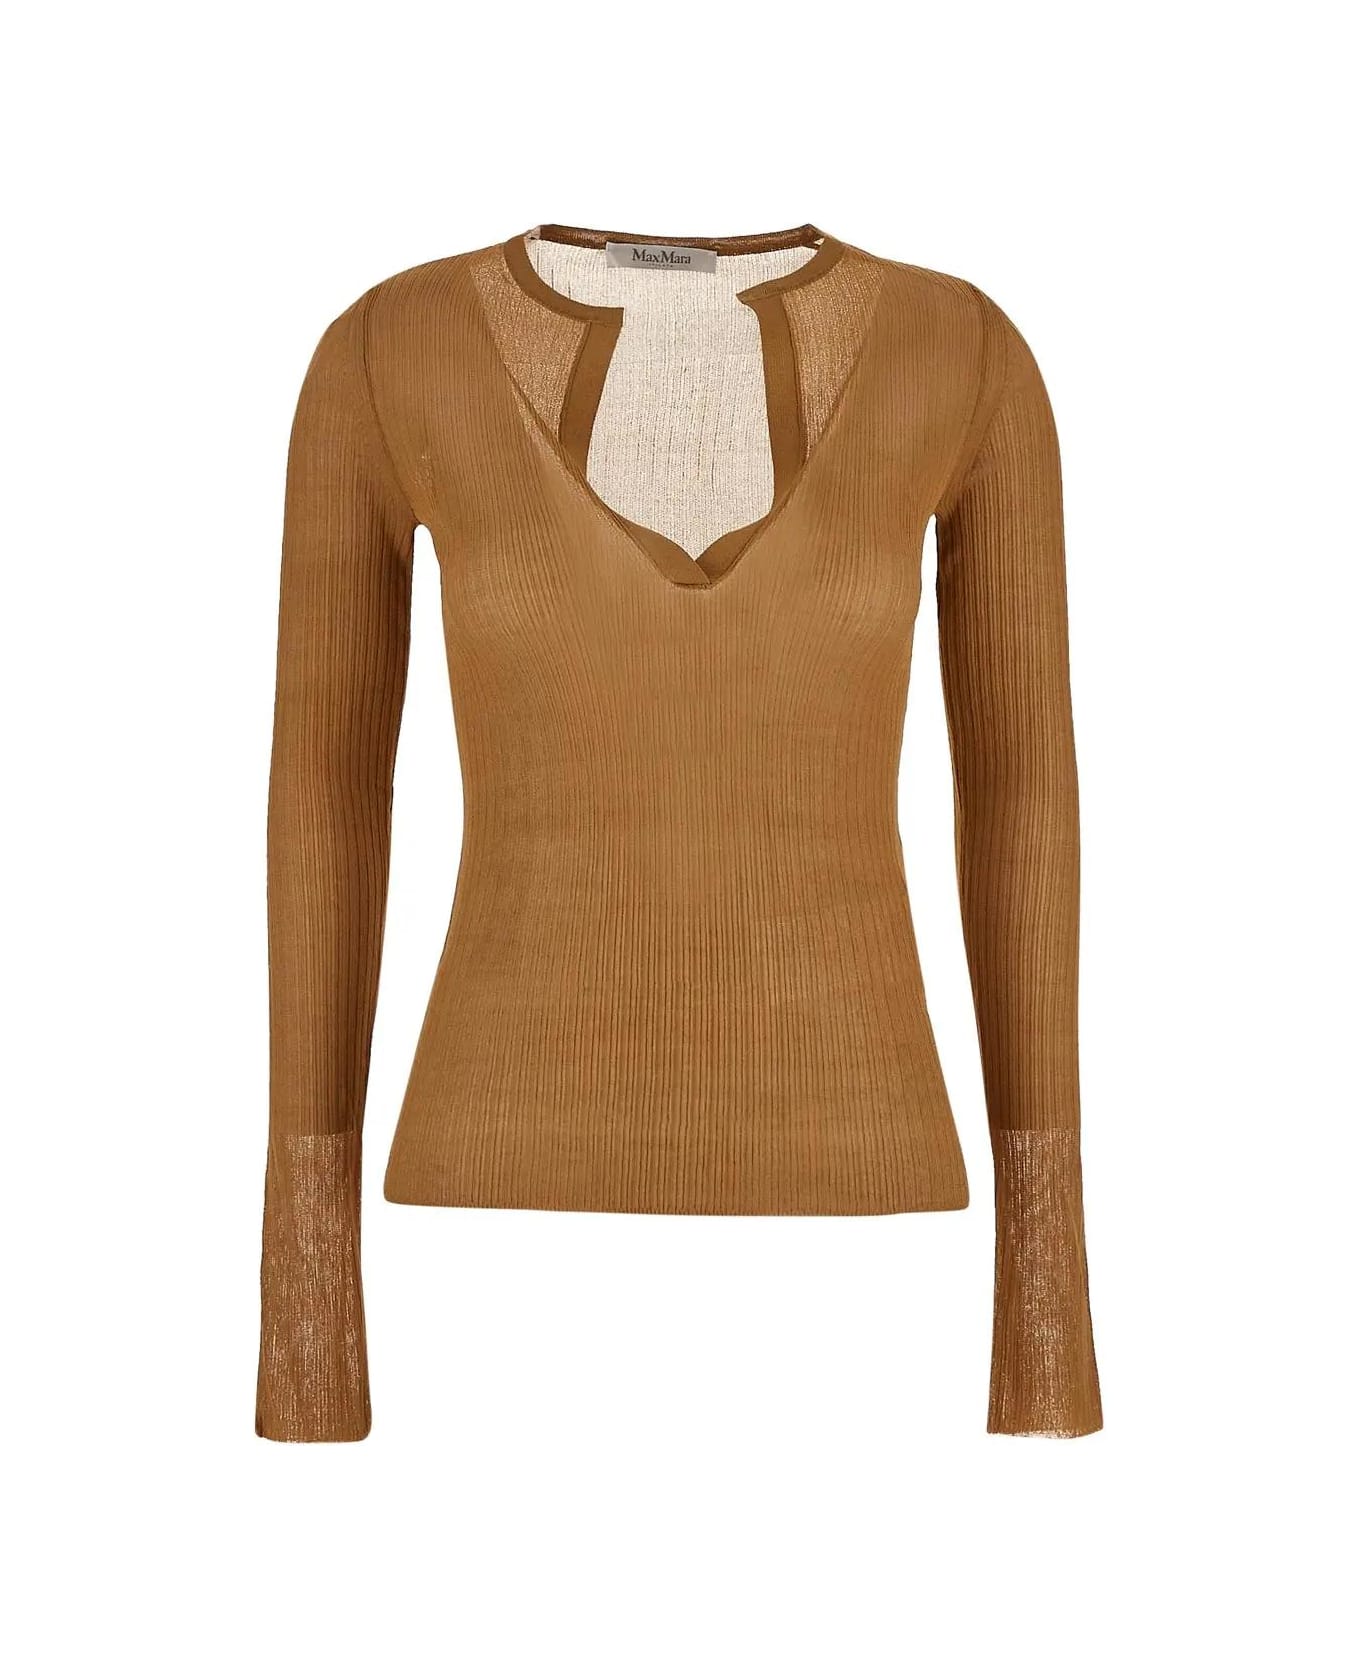 Max Mara Pleated Top - Leather Brown